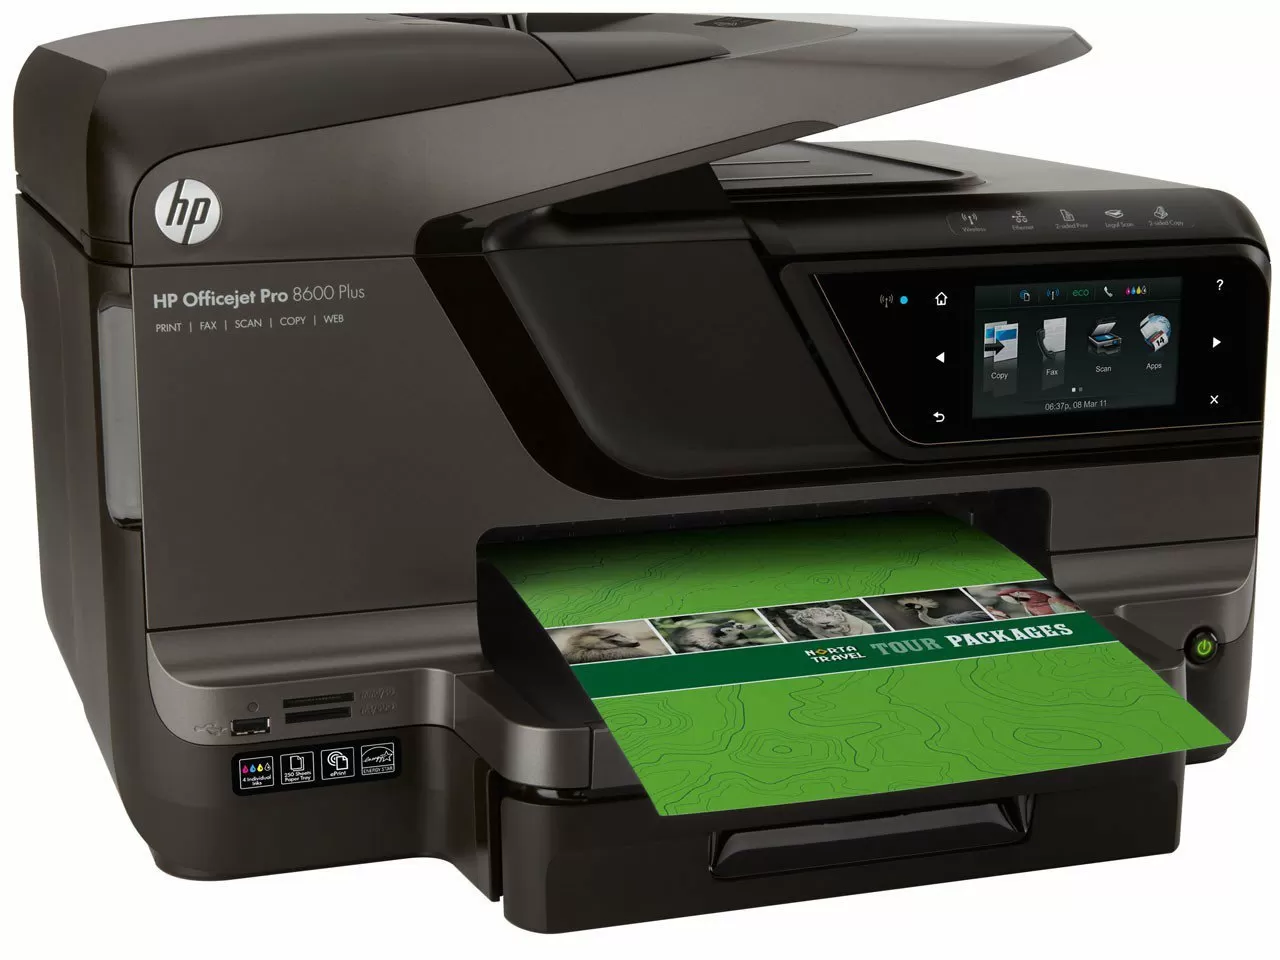 HP issues firmware update that bans third-party ink cartridges... again